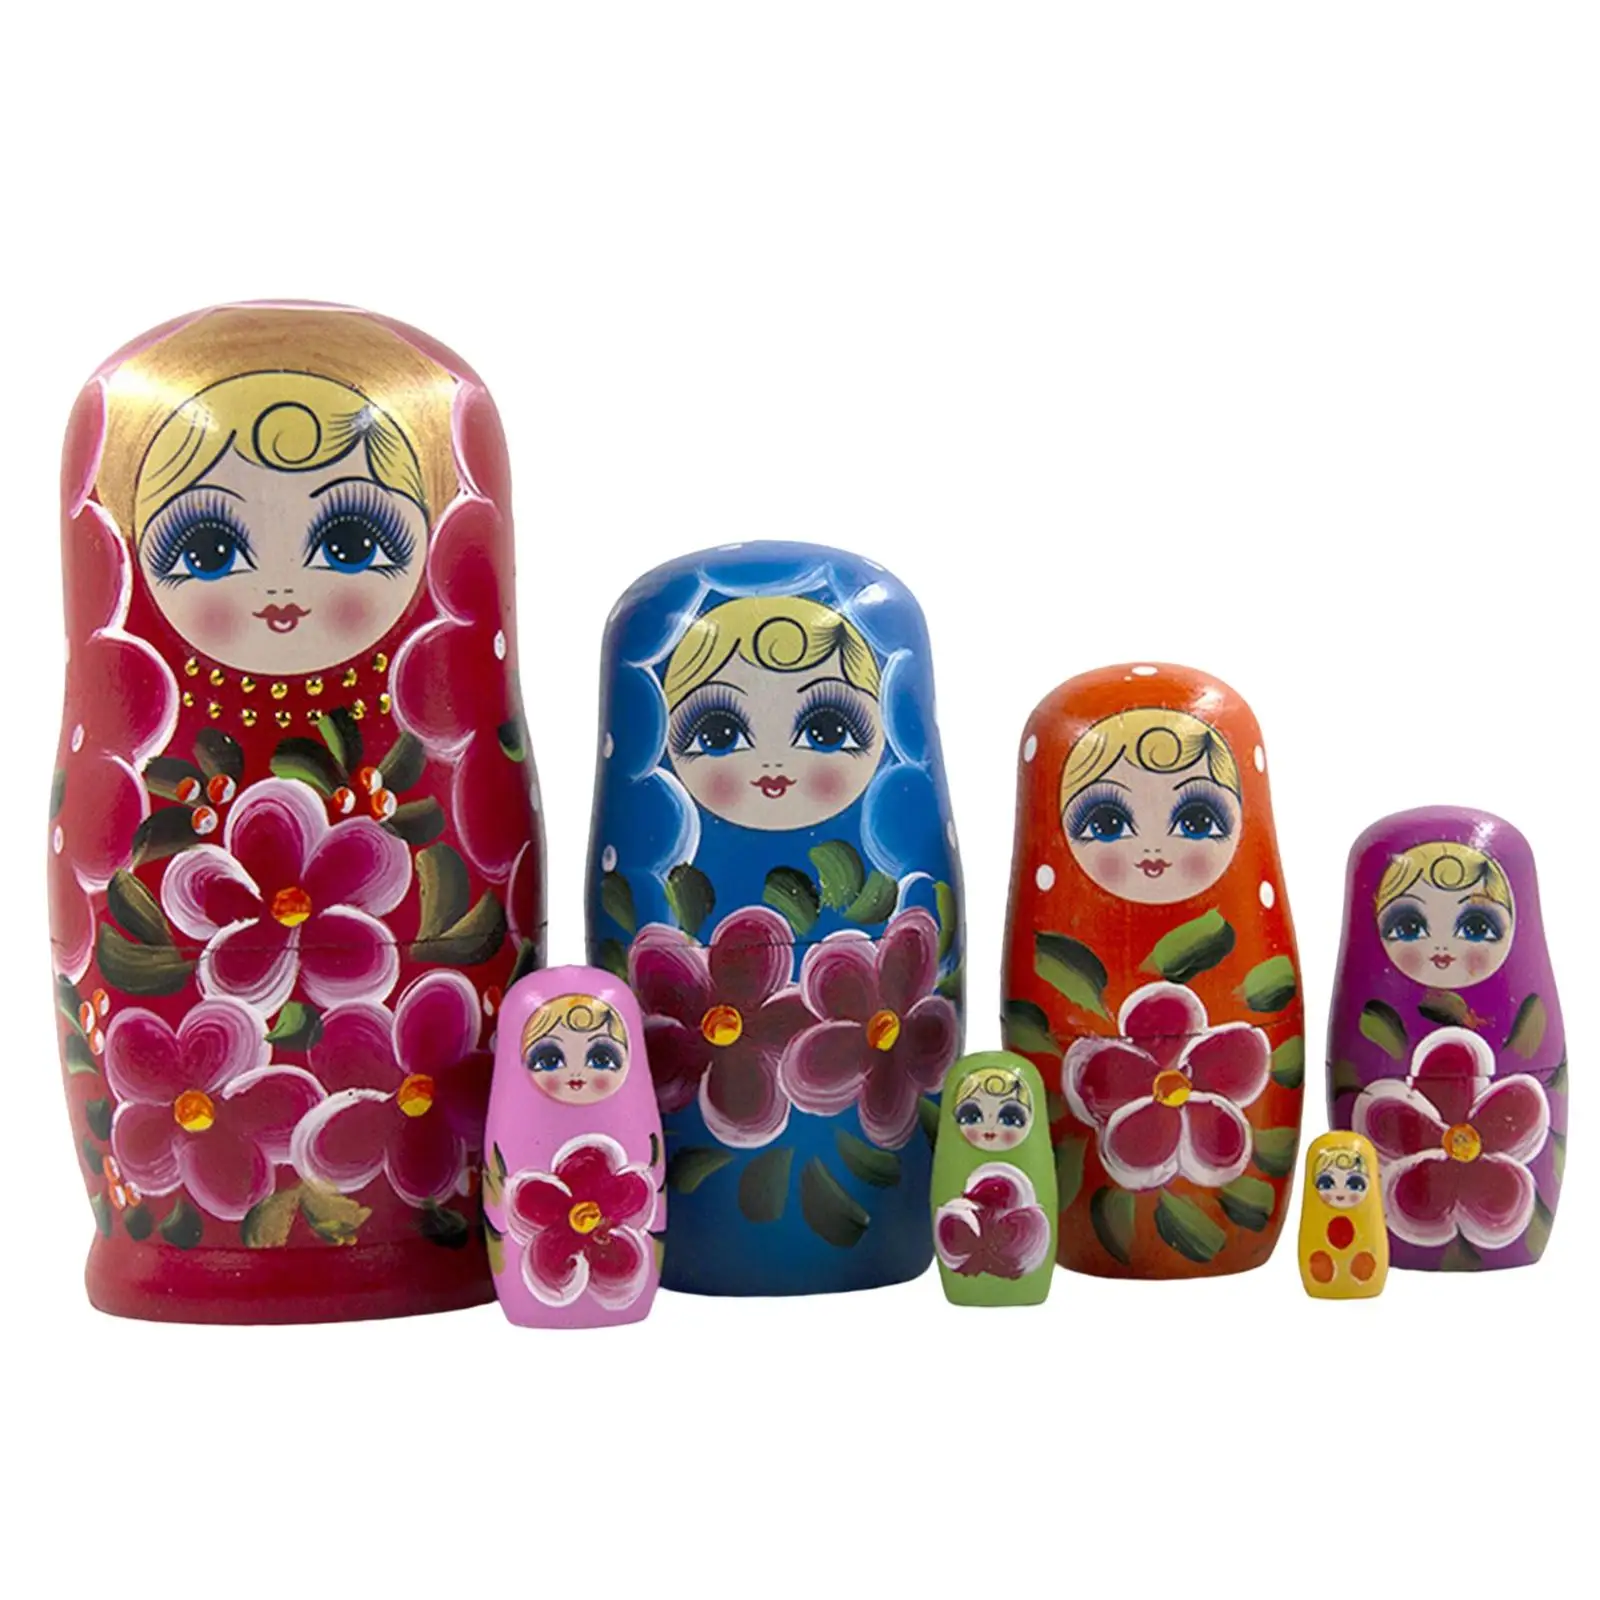 Lovely Wooden Girls Russian Nesting Dolls Kits 7 Count Handmade Child Room Decoration Housewarming Gifts Popular Colorful